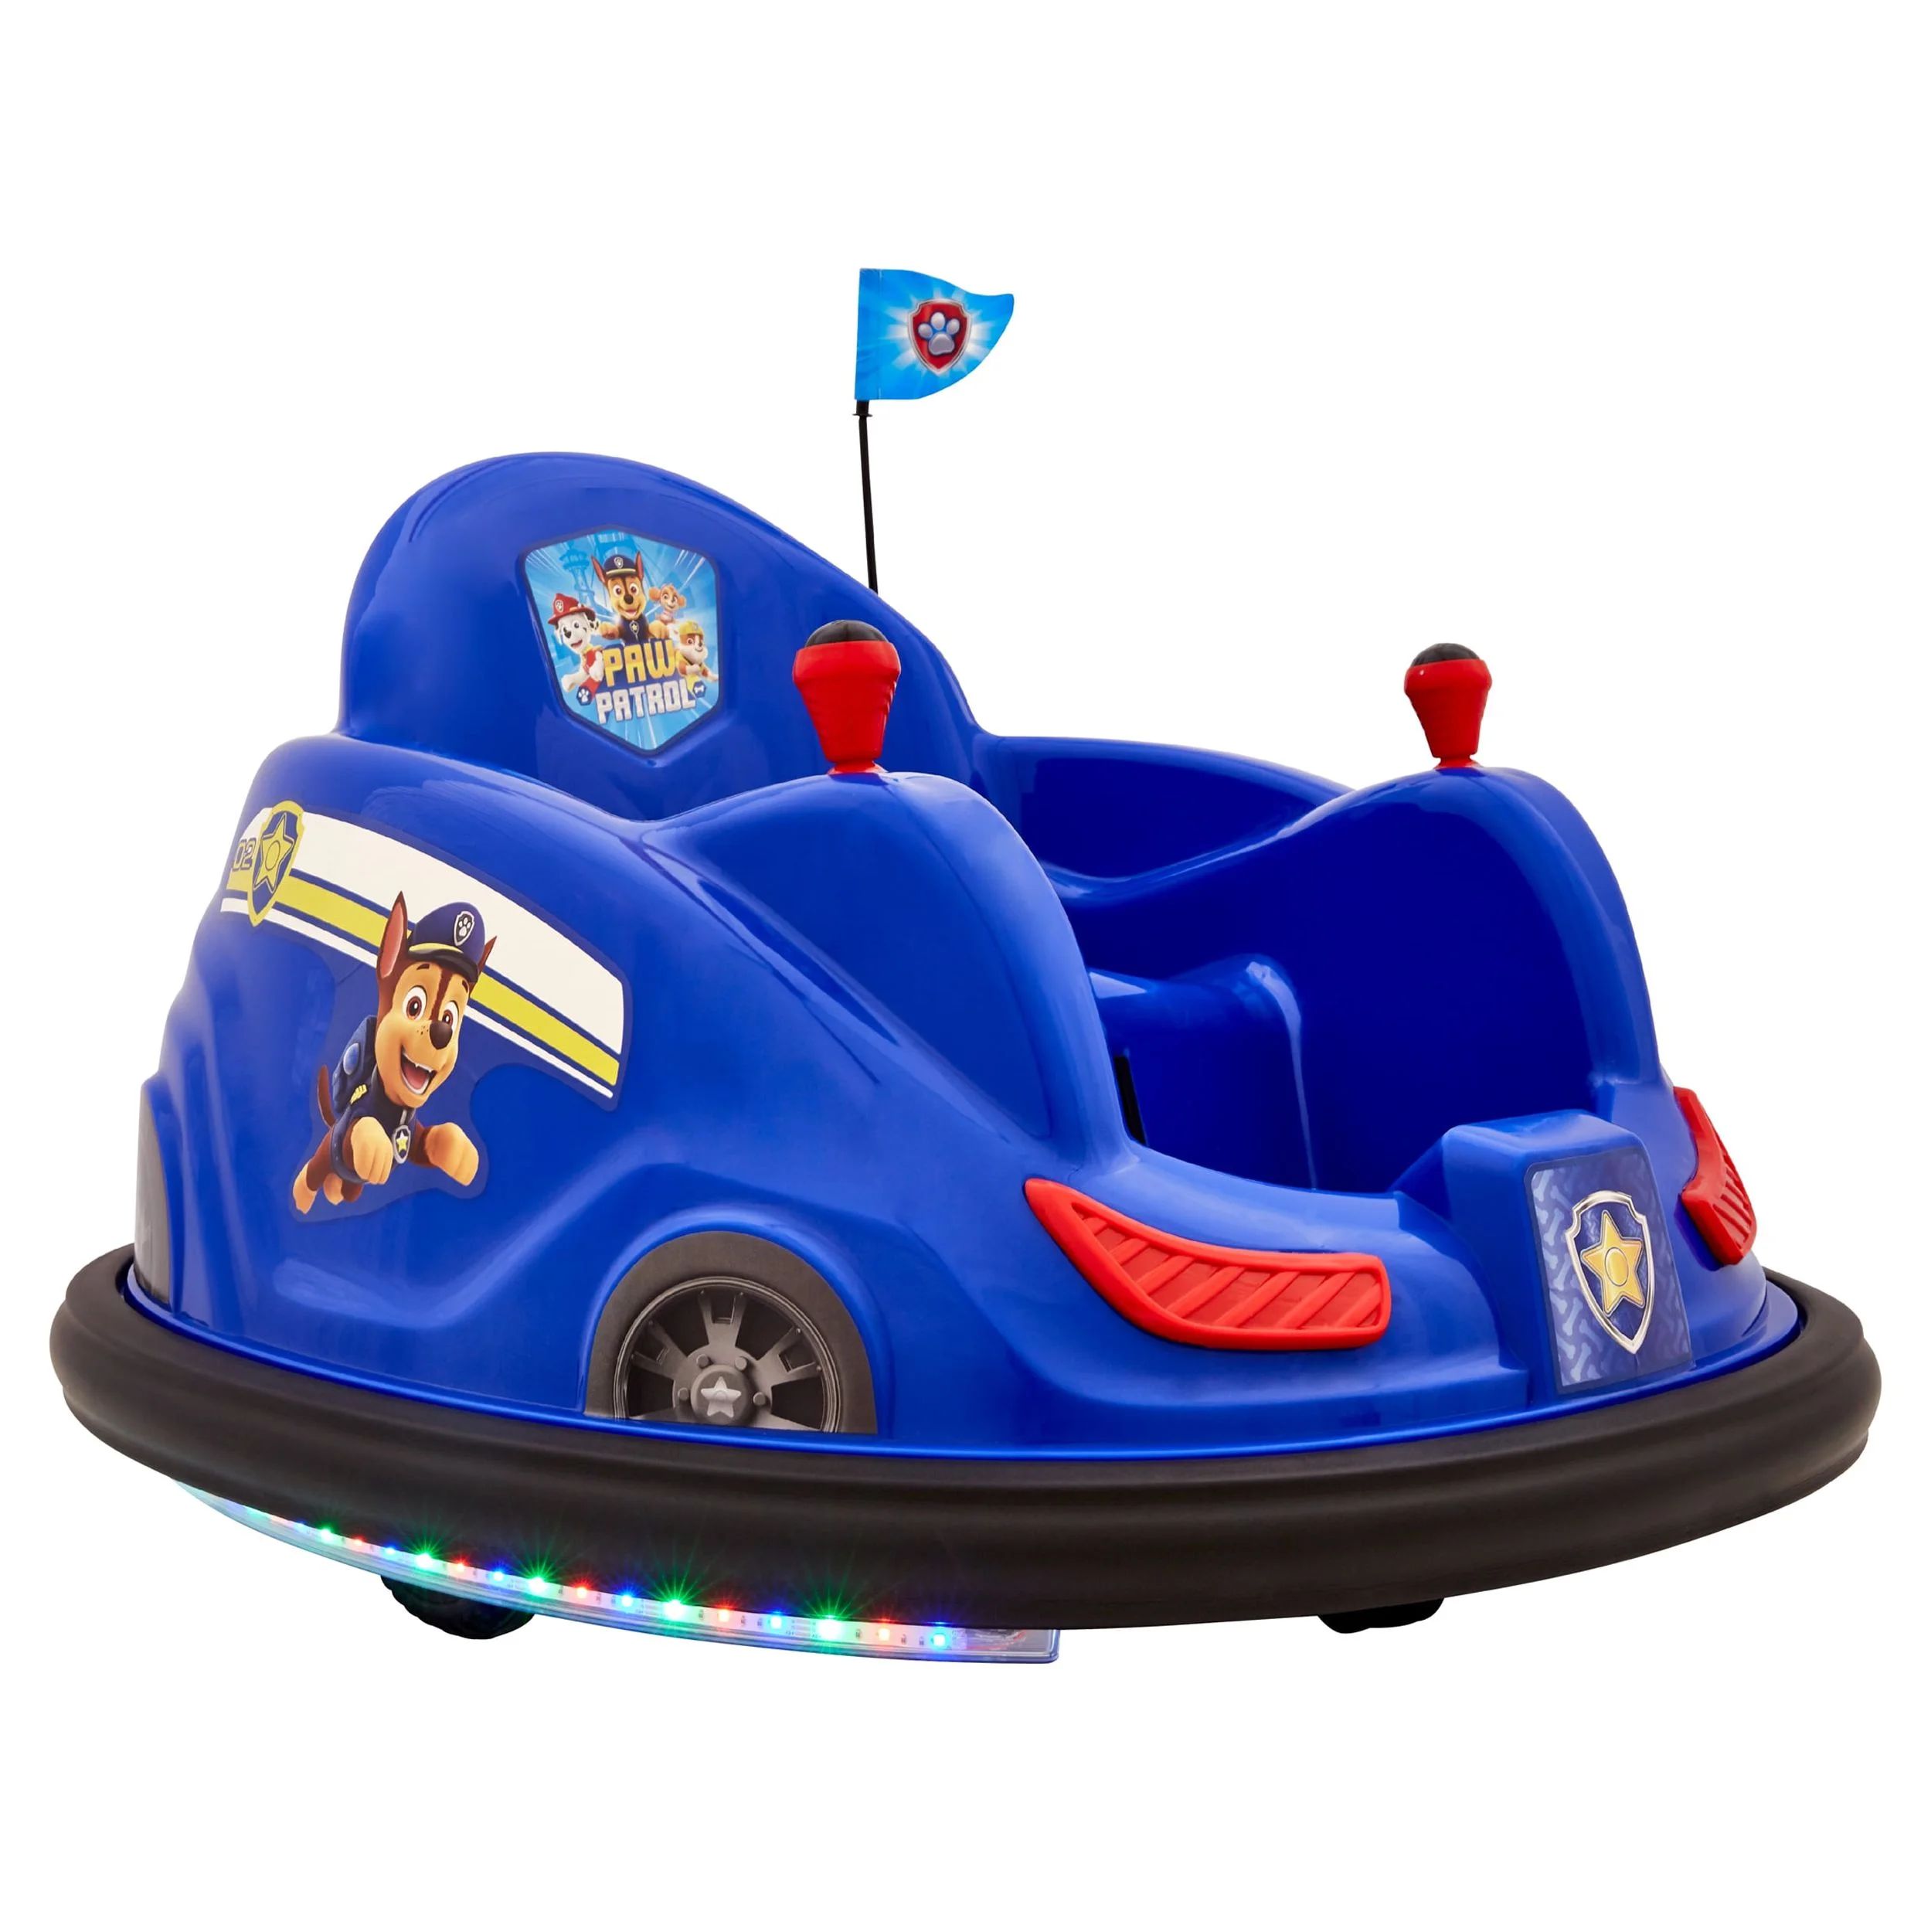 PAW Patrol 6V Bumper Car, Battery Powered, Electric Ride On by Flybar, Includes Charger | Walmart (US)